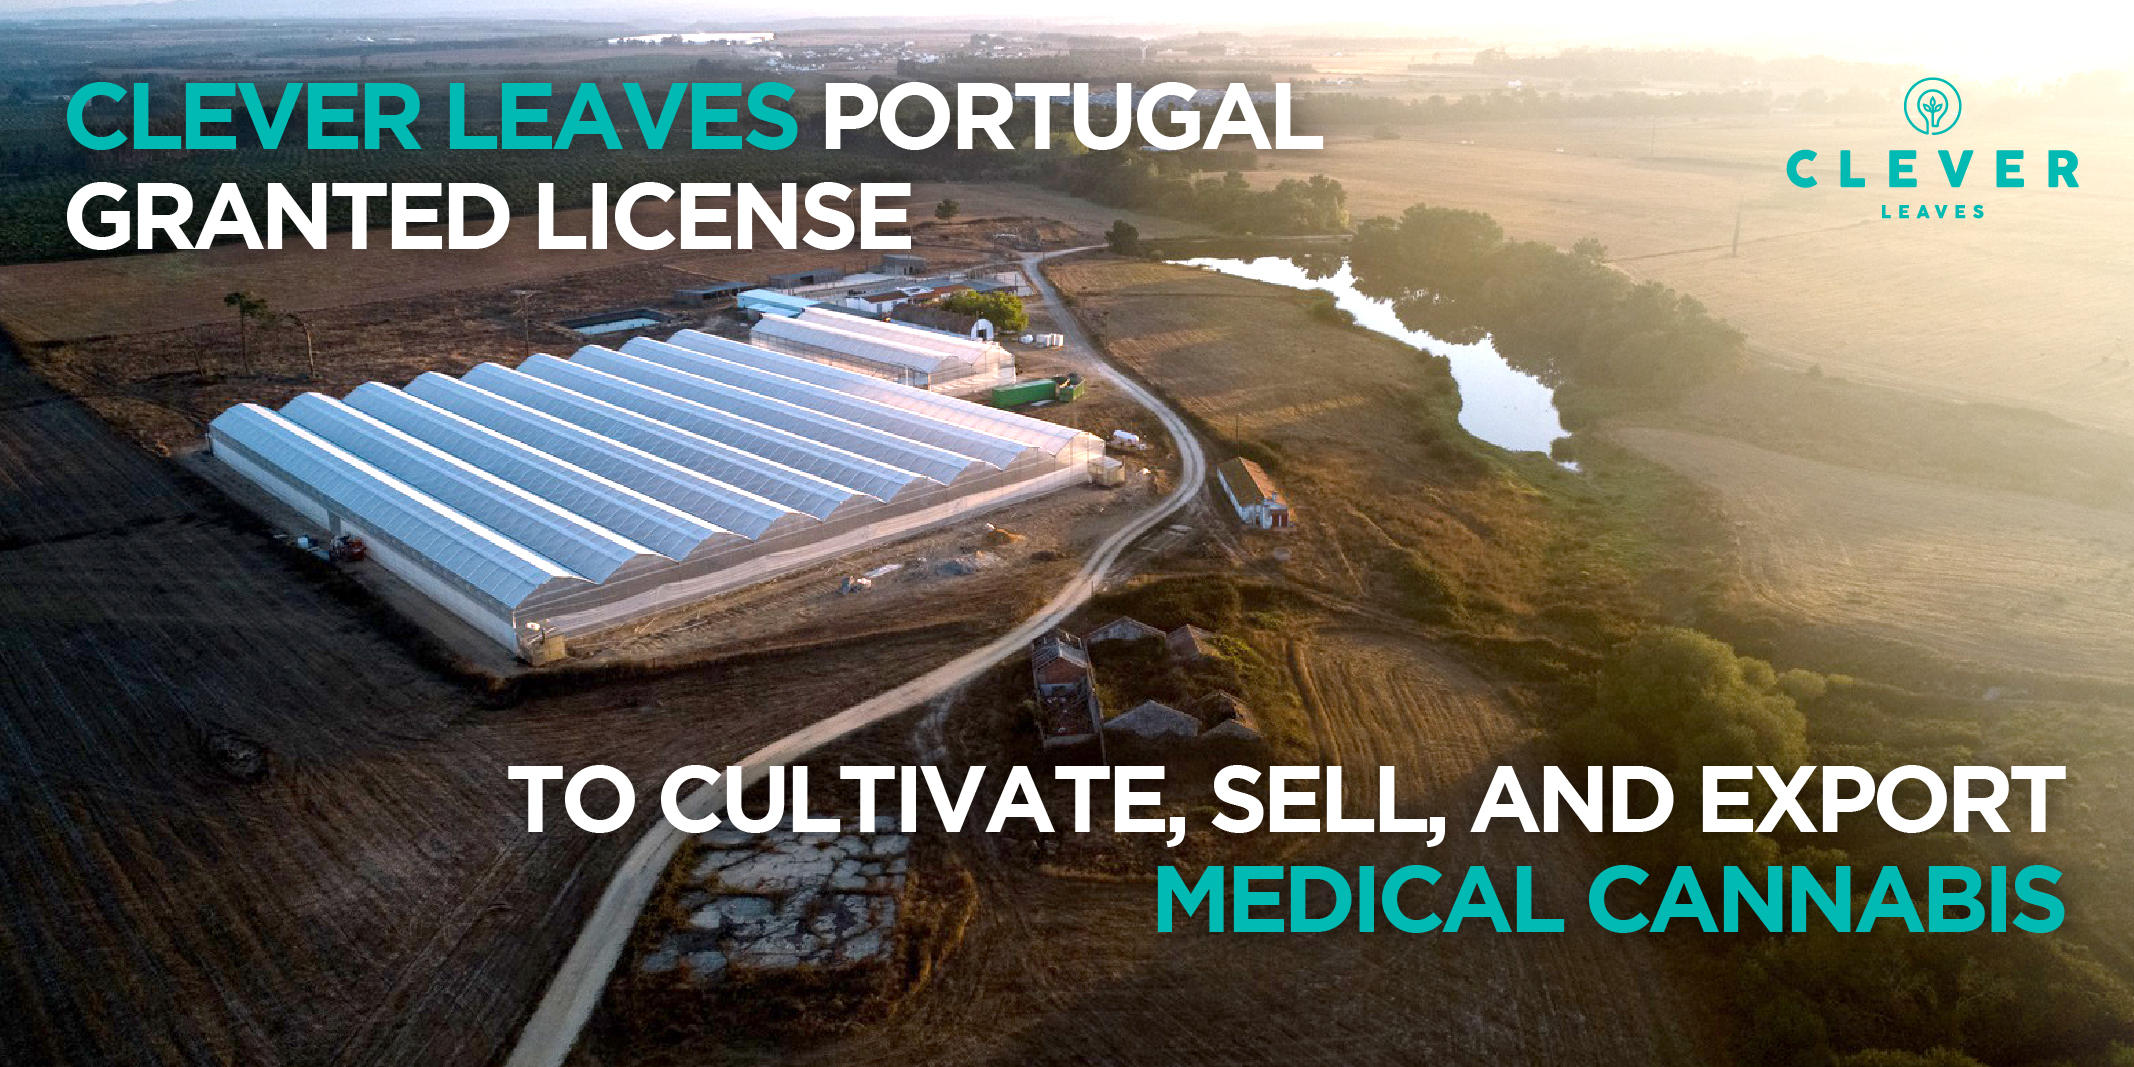 Clever leaves portugal granted license to cultive sell and export medical cannabis